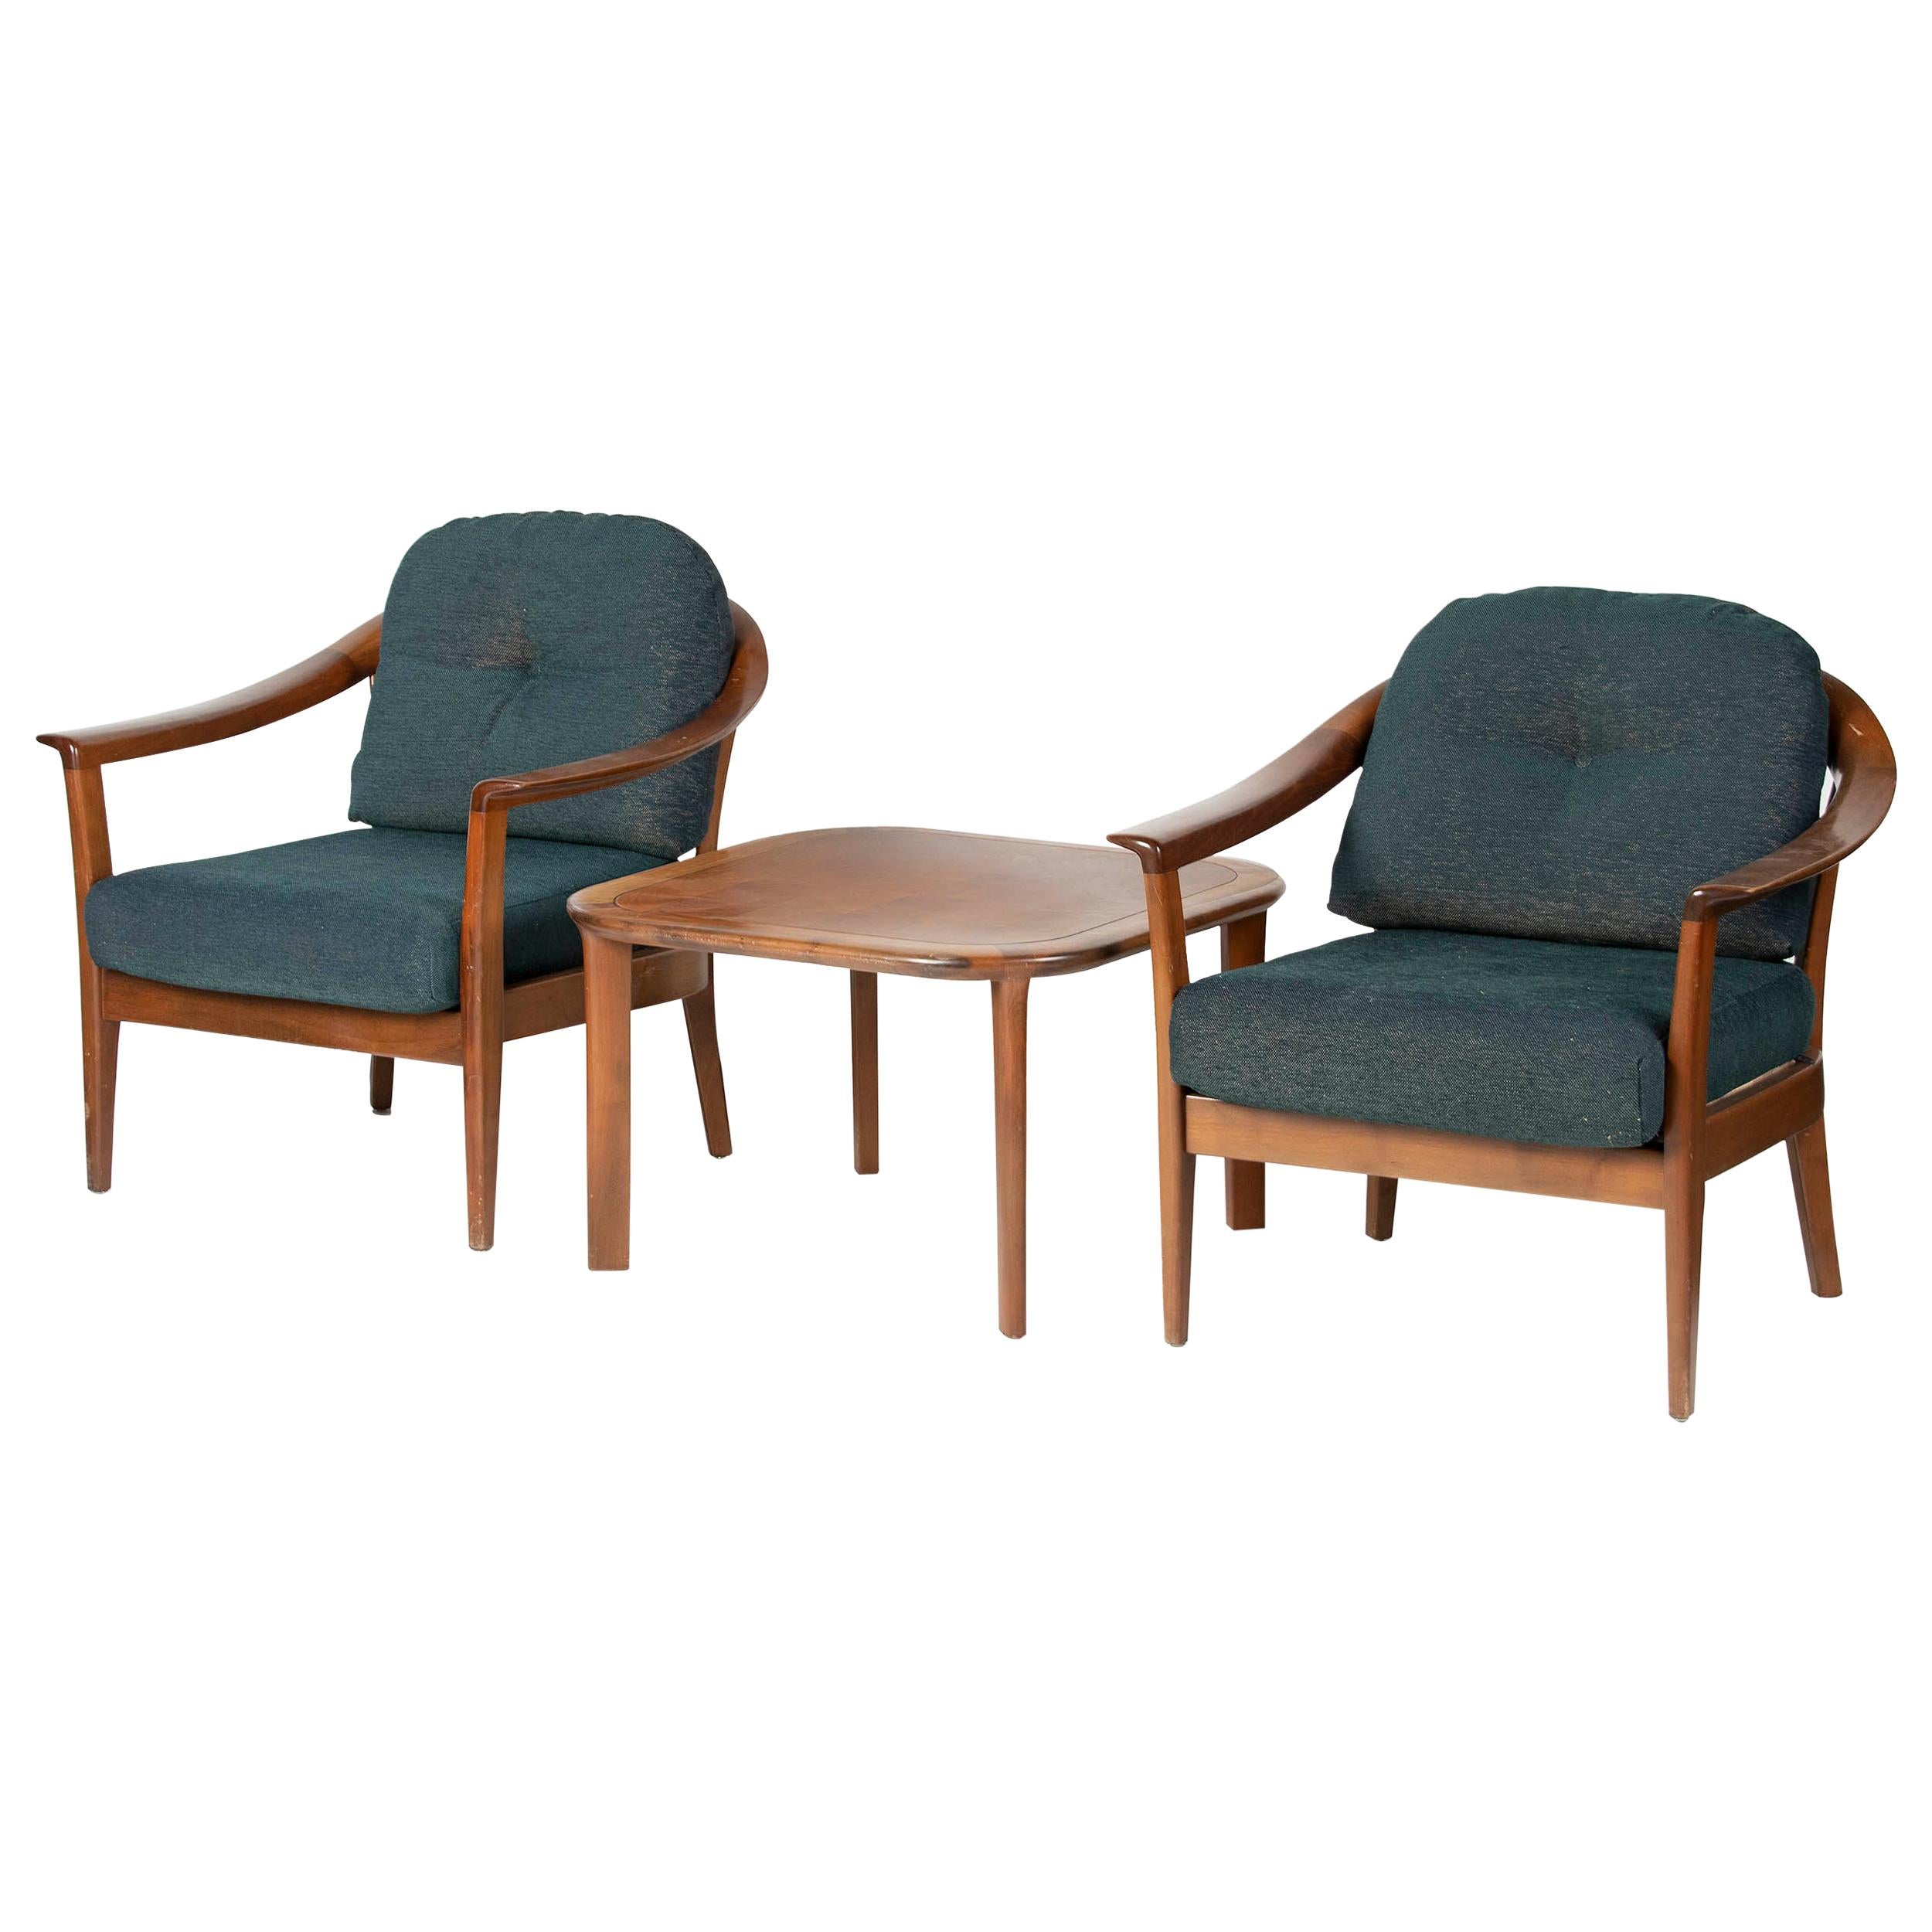 Two Cherrywood Easy Chairs with Sidetable made by Wilhelm Knoll Mid-20th Century